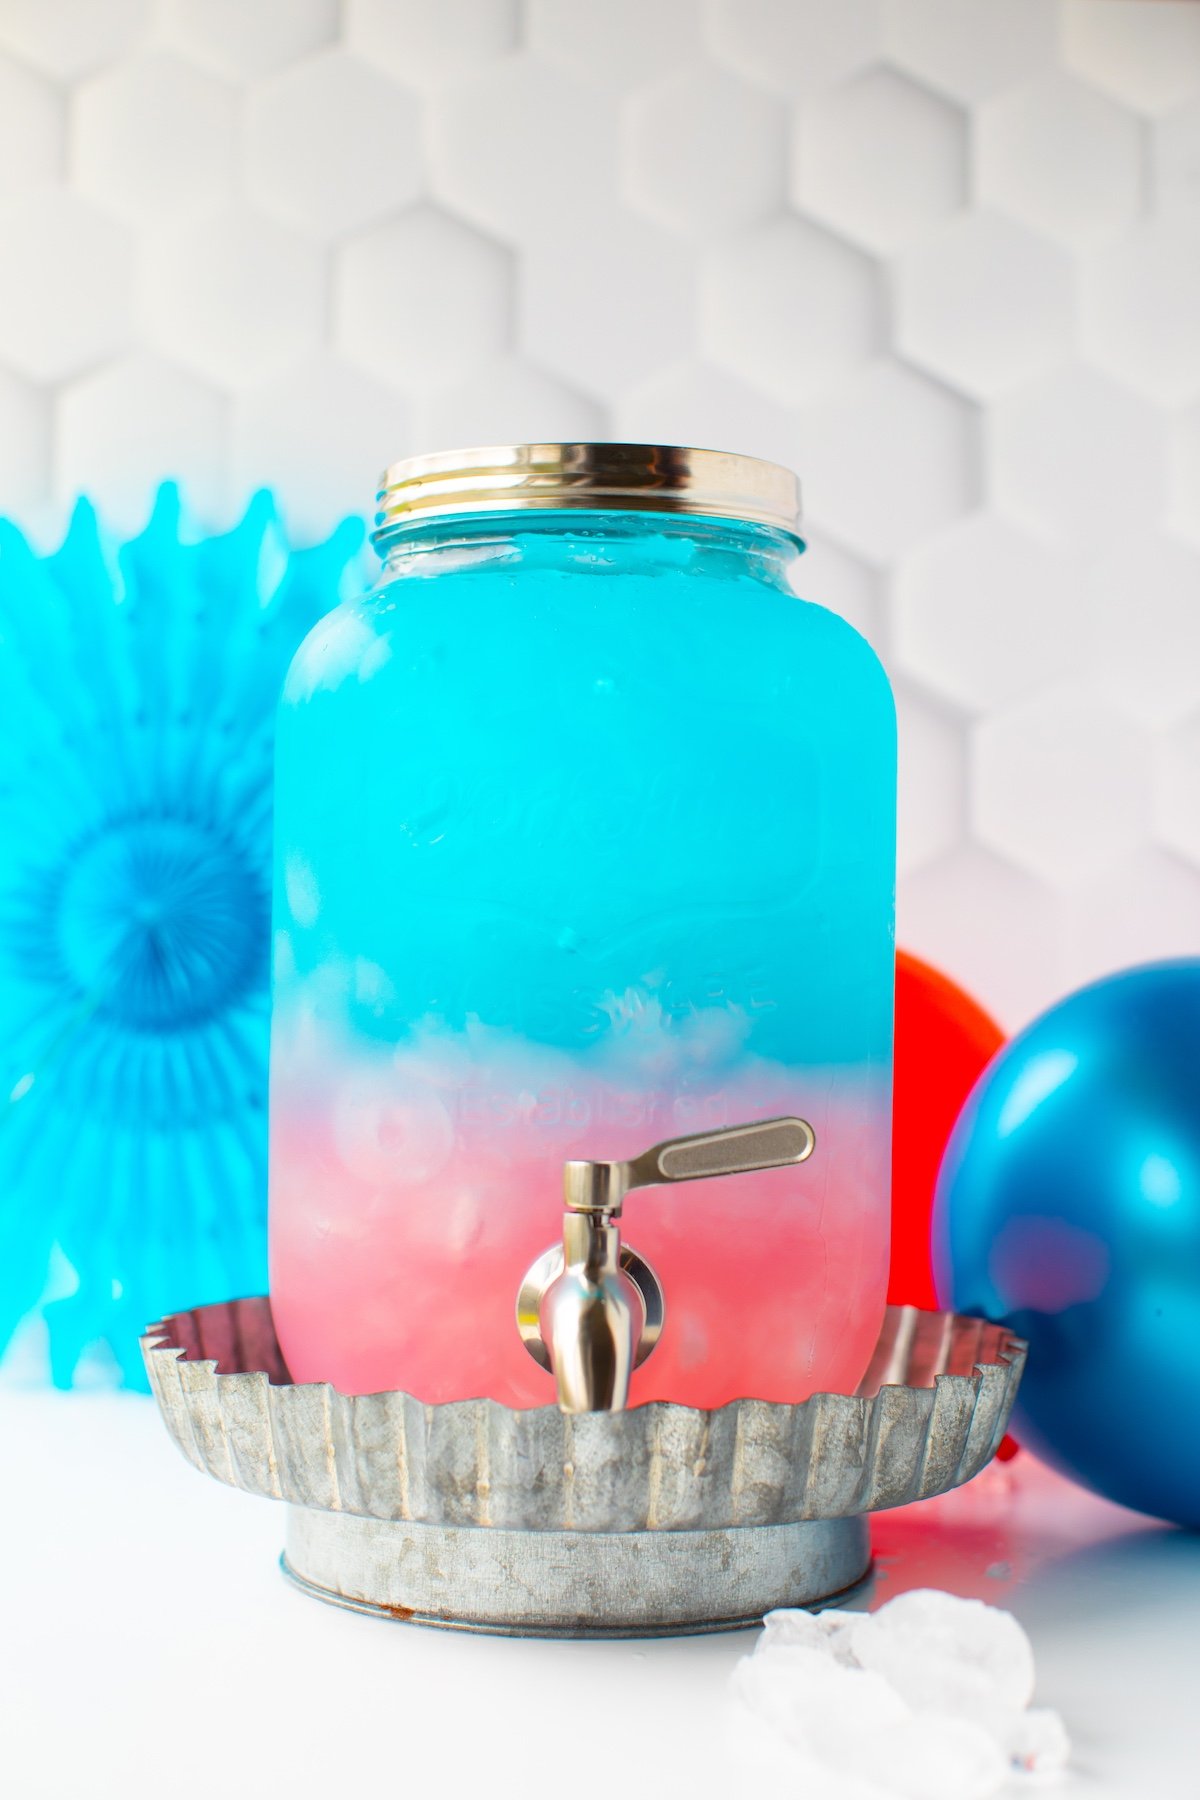 transformers layered punch, red white blue punch